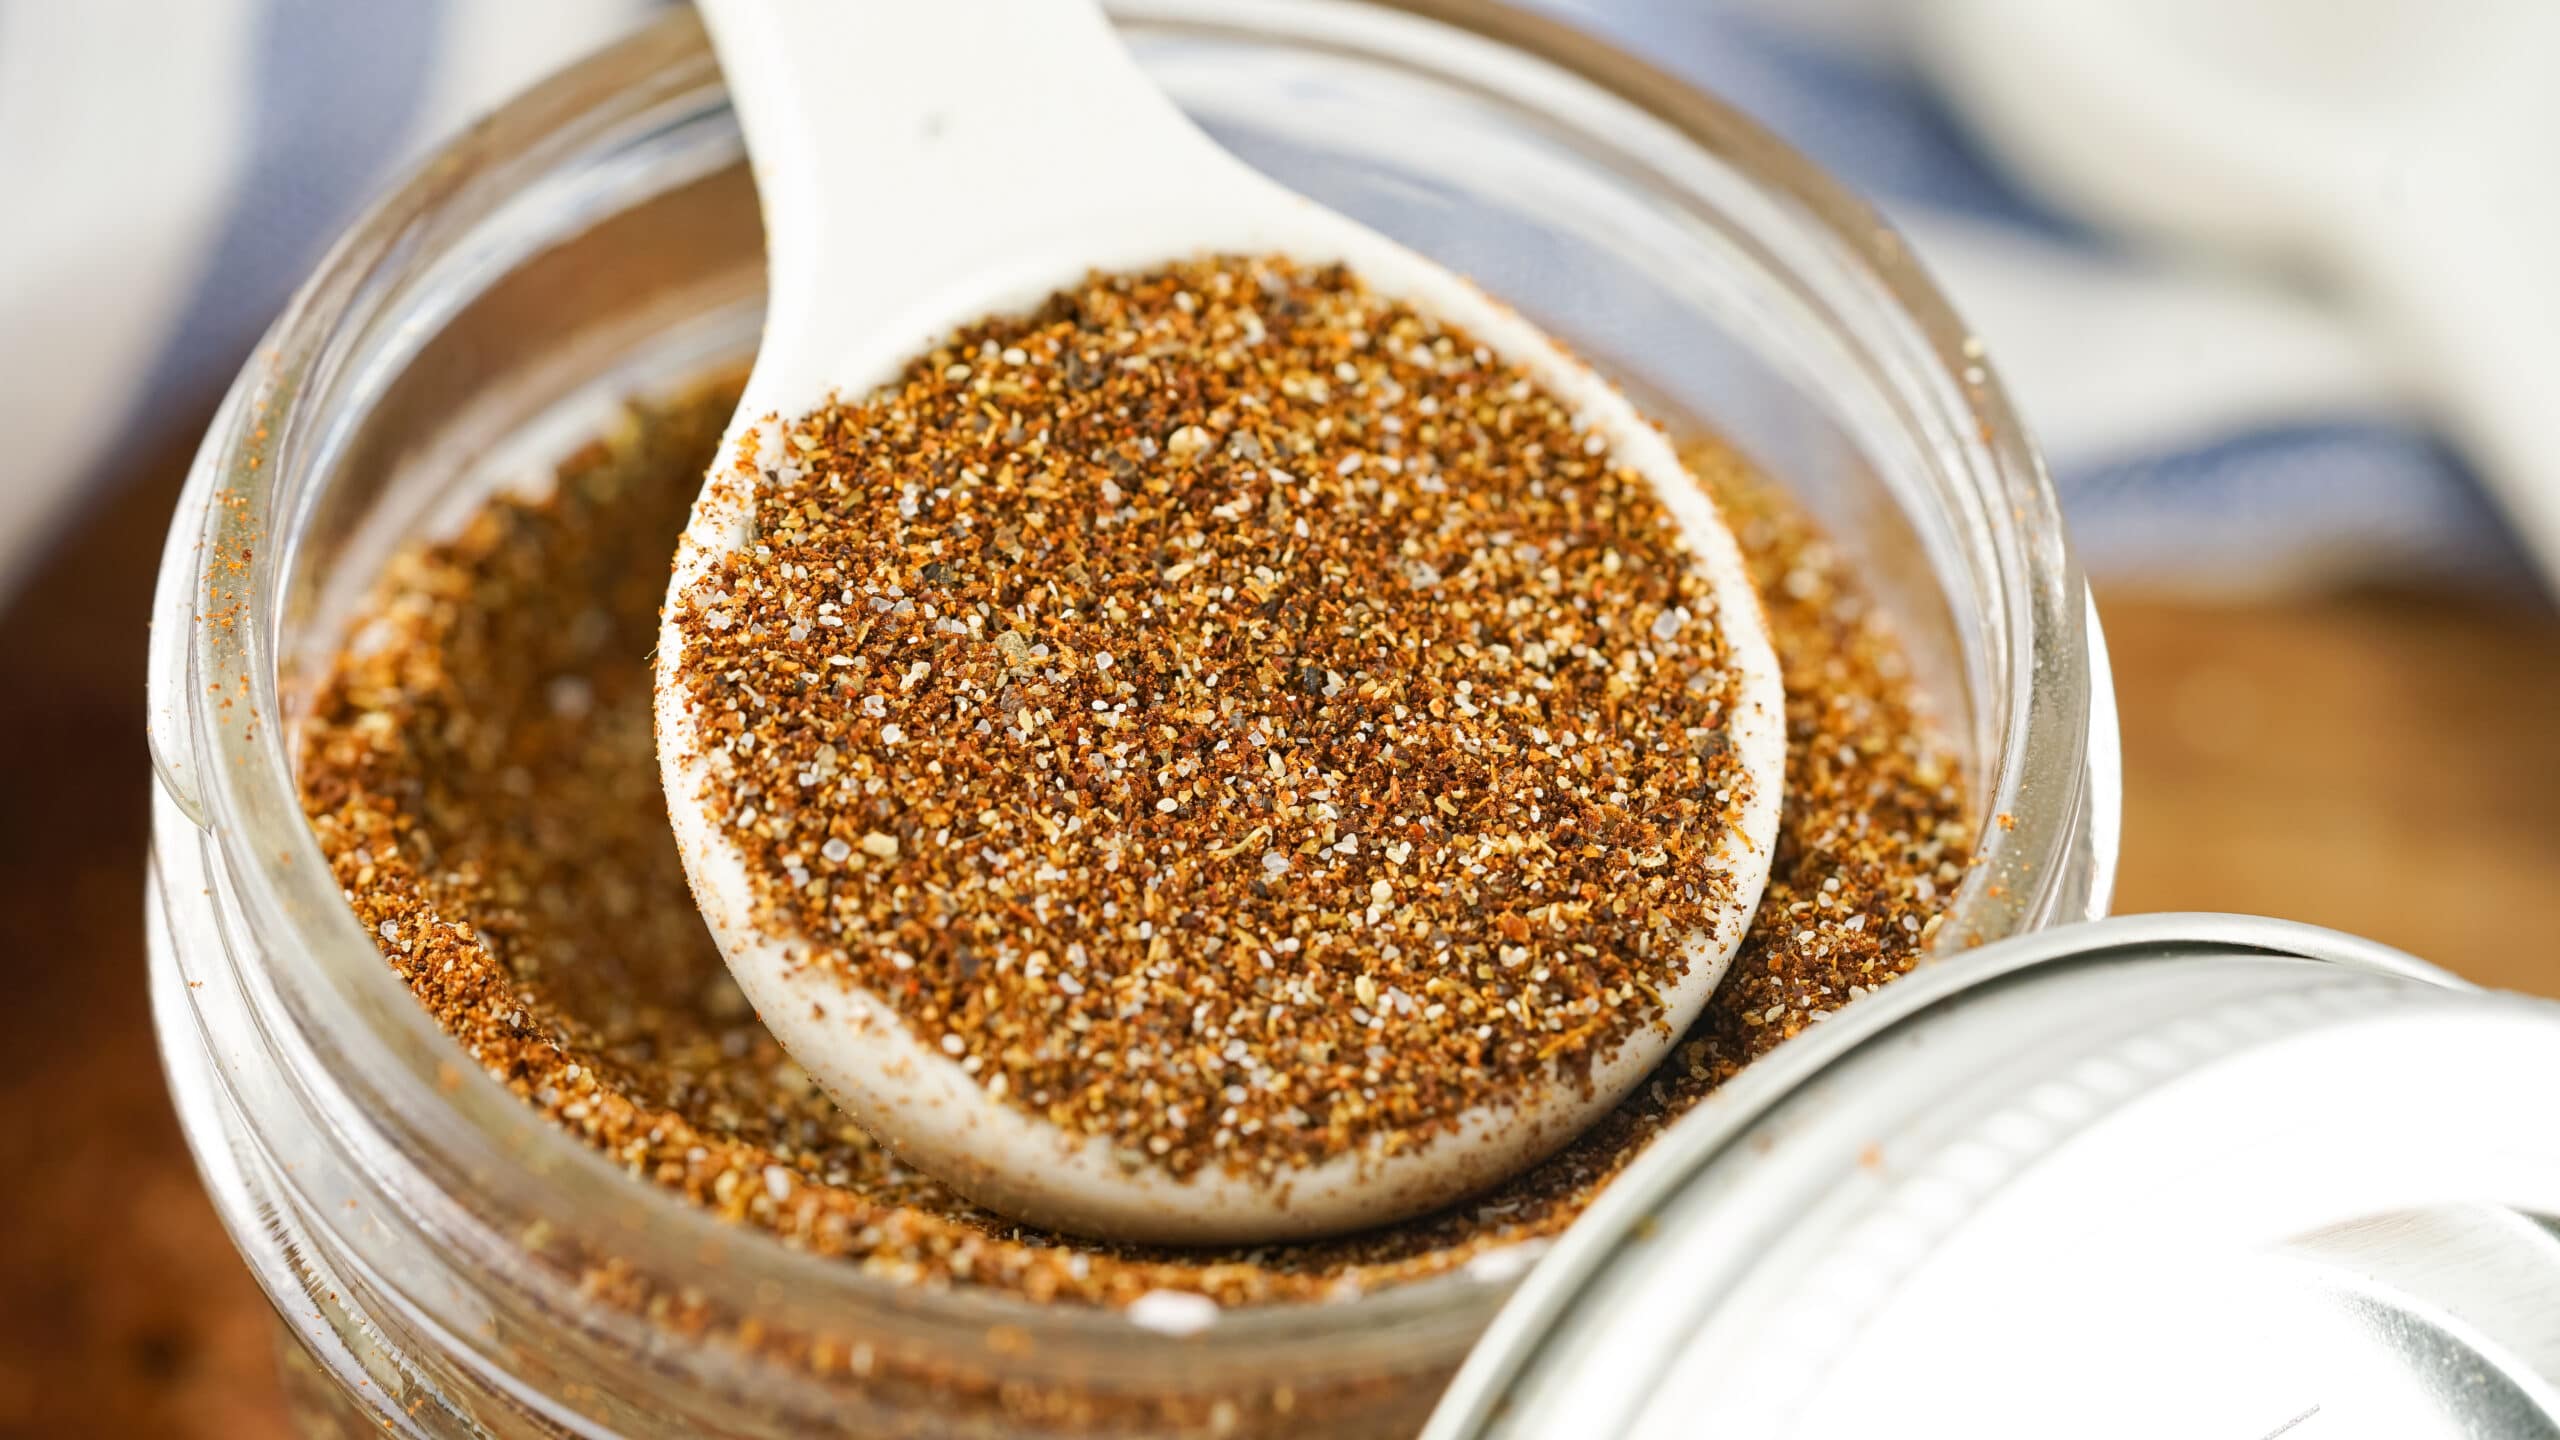 chili seasonings in a jar with a spoonful of the spices